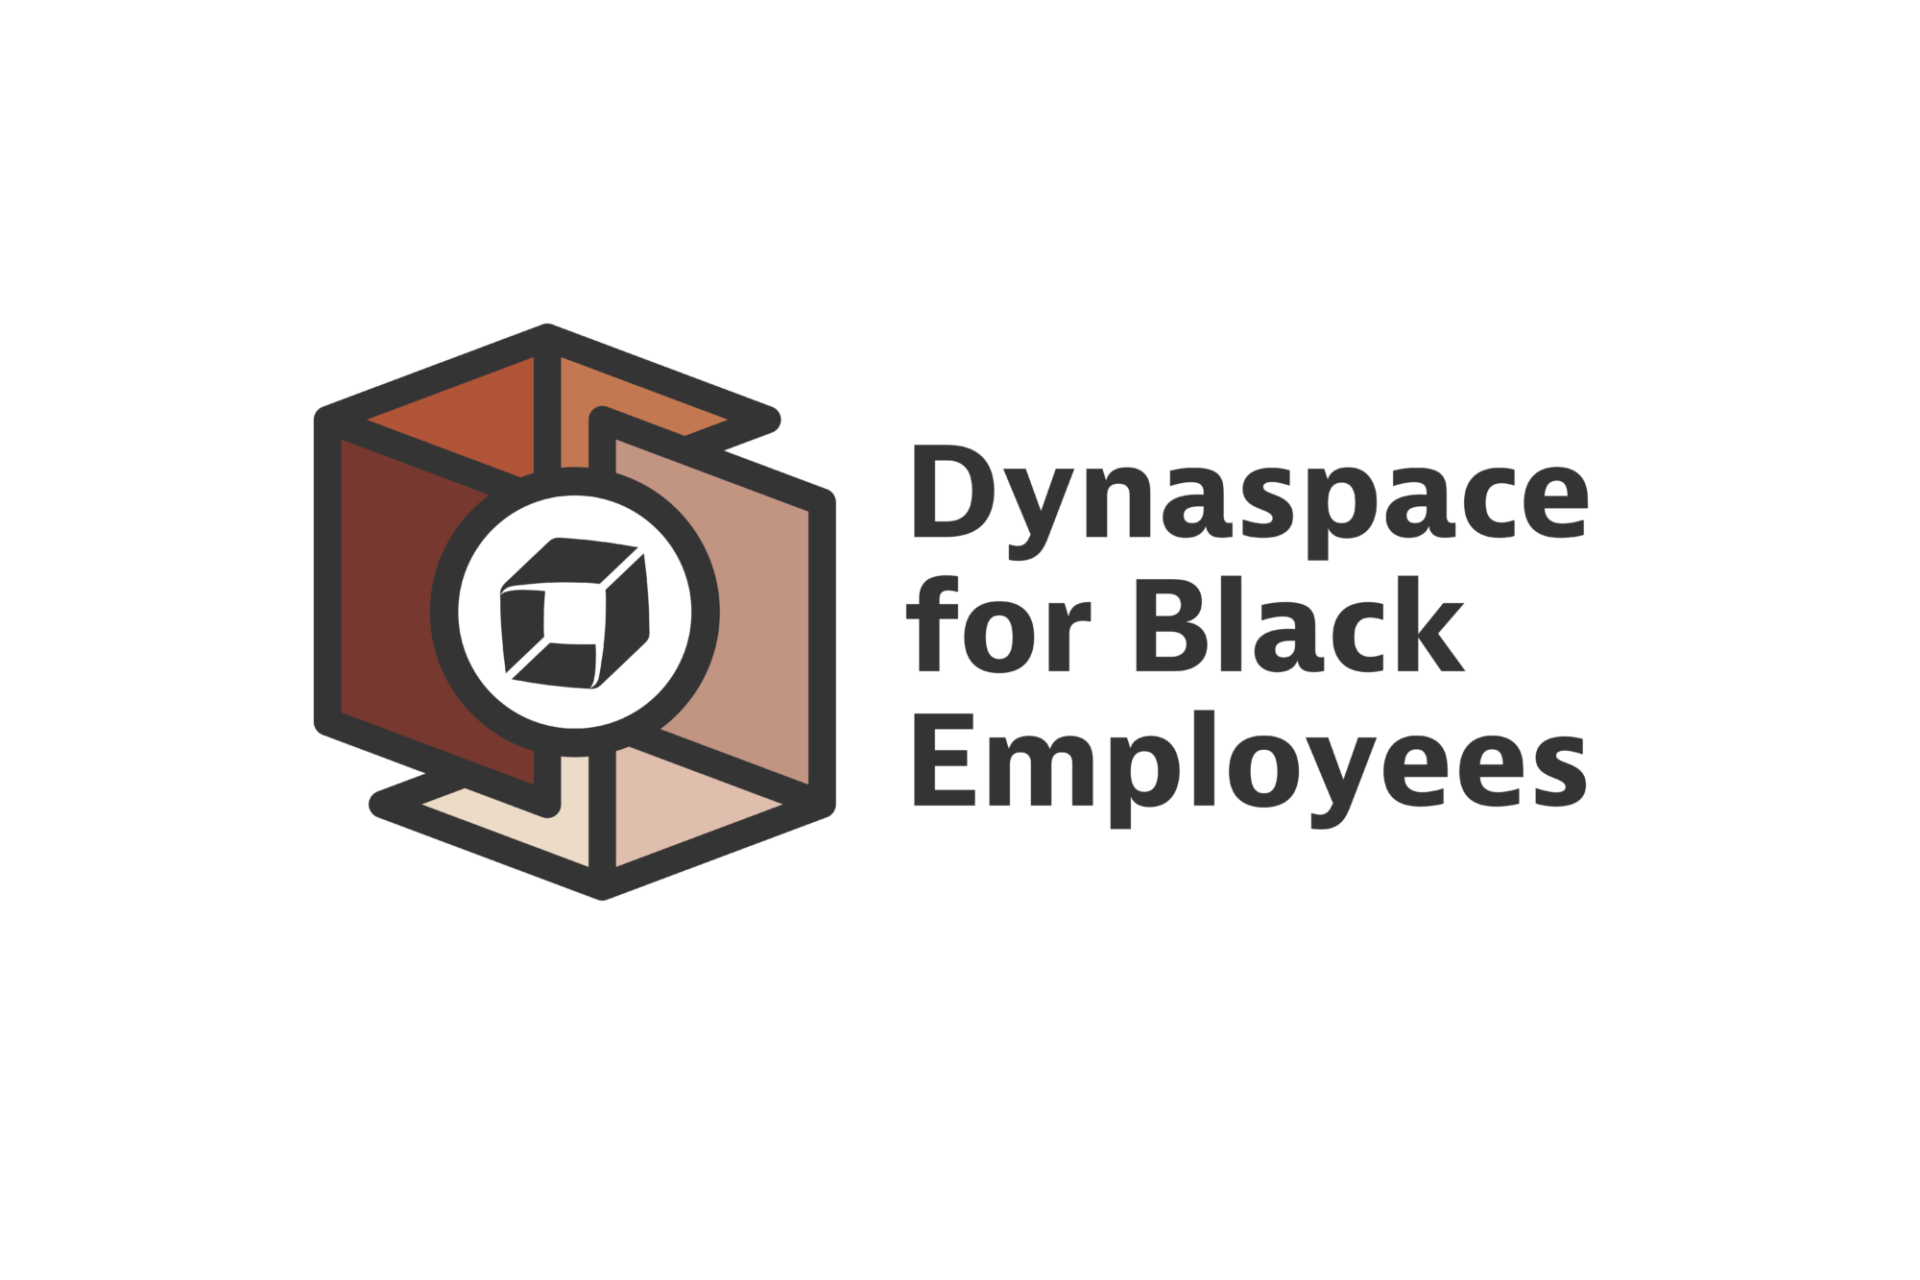 ERG Badge Dynaspace for Black Employees